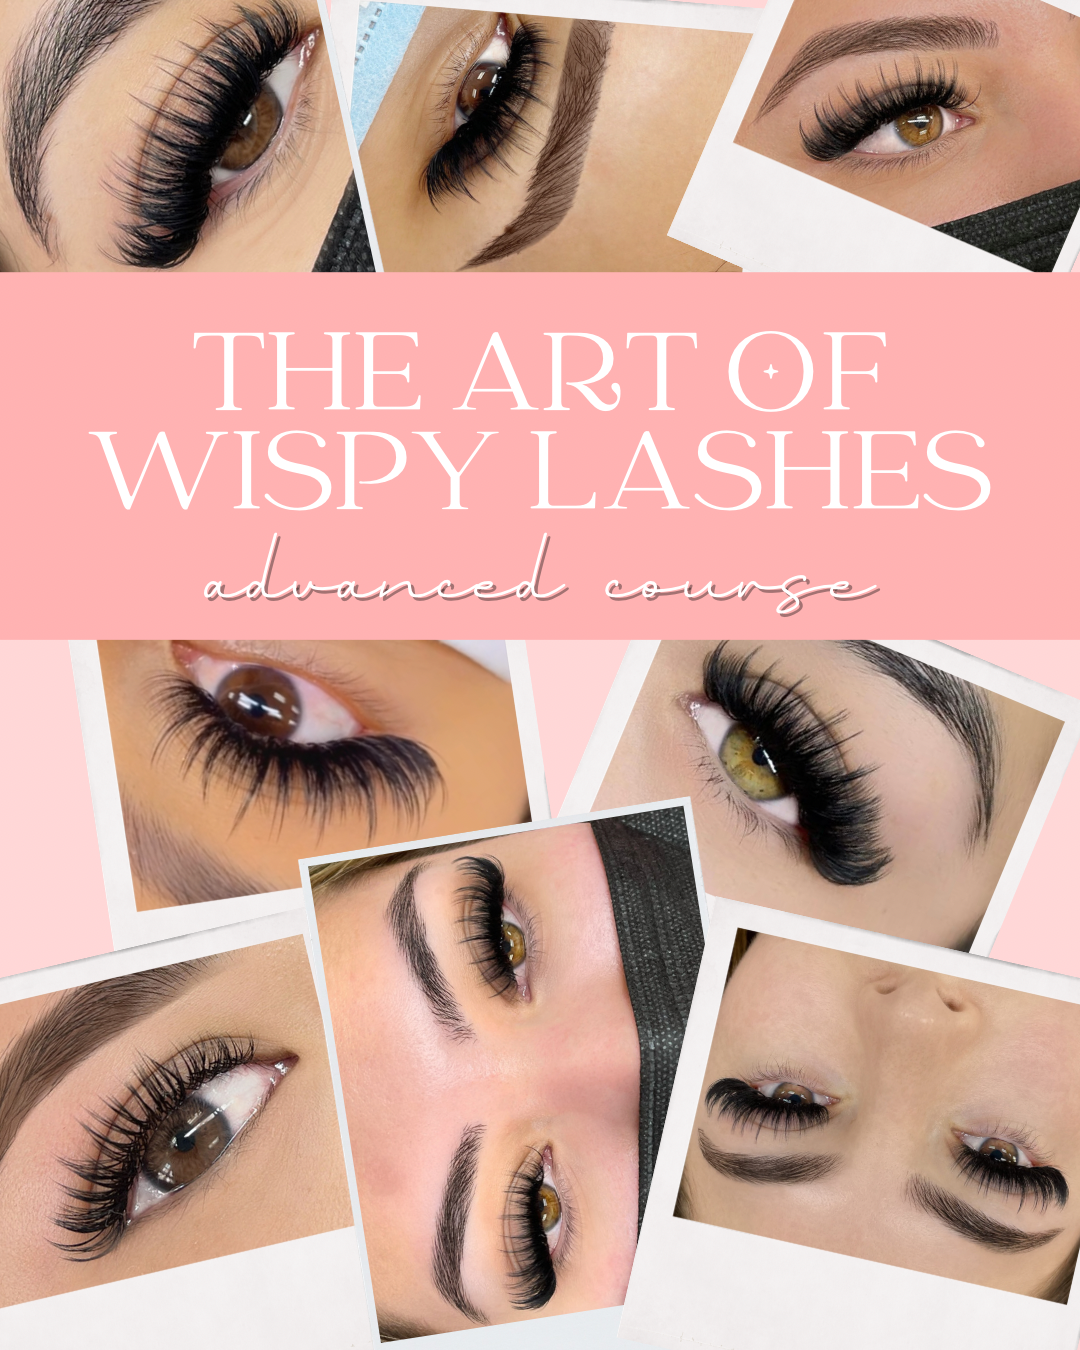 The Art of Wispy Lashes: Advanced Course